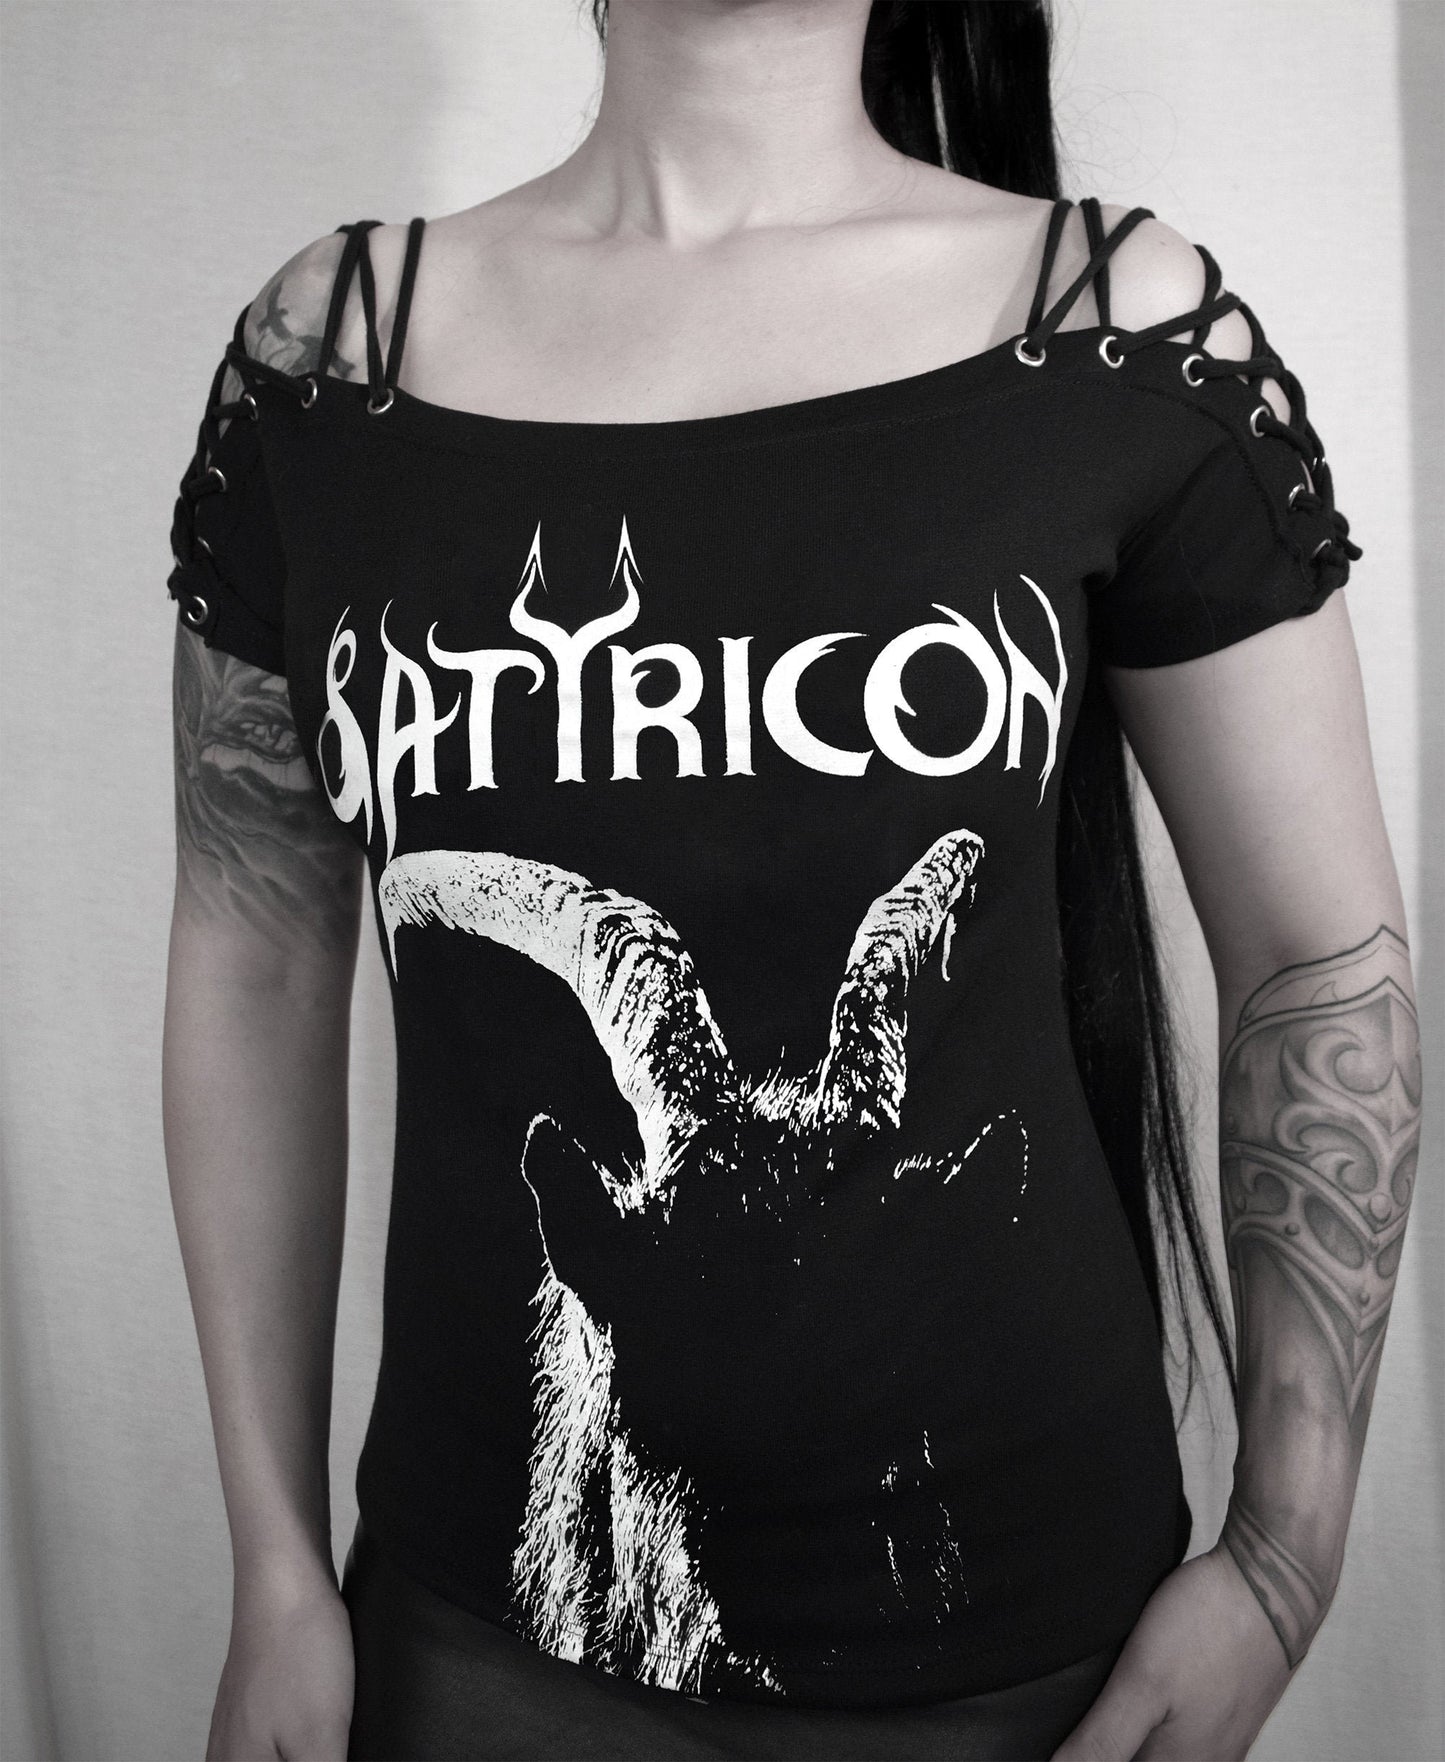 Satyricon Satyr t shirt Lace Up Eyelet Off Shoulder